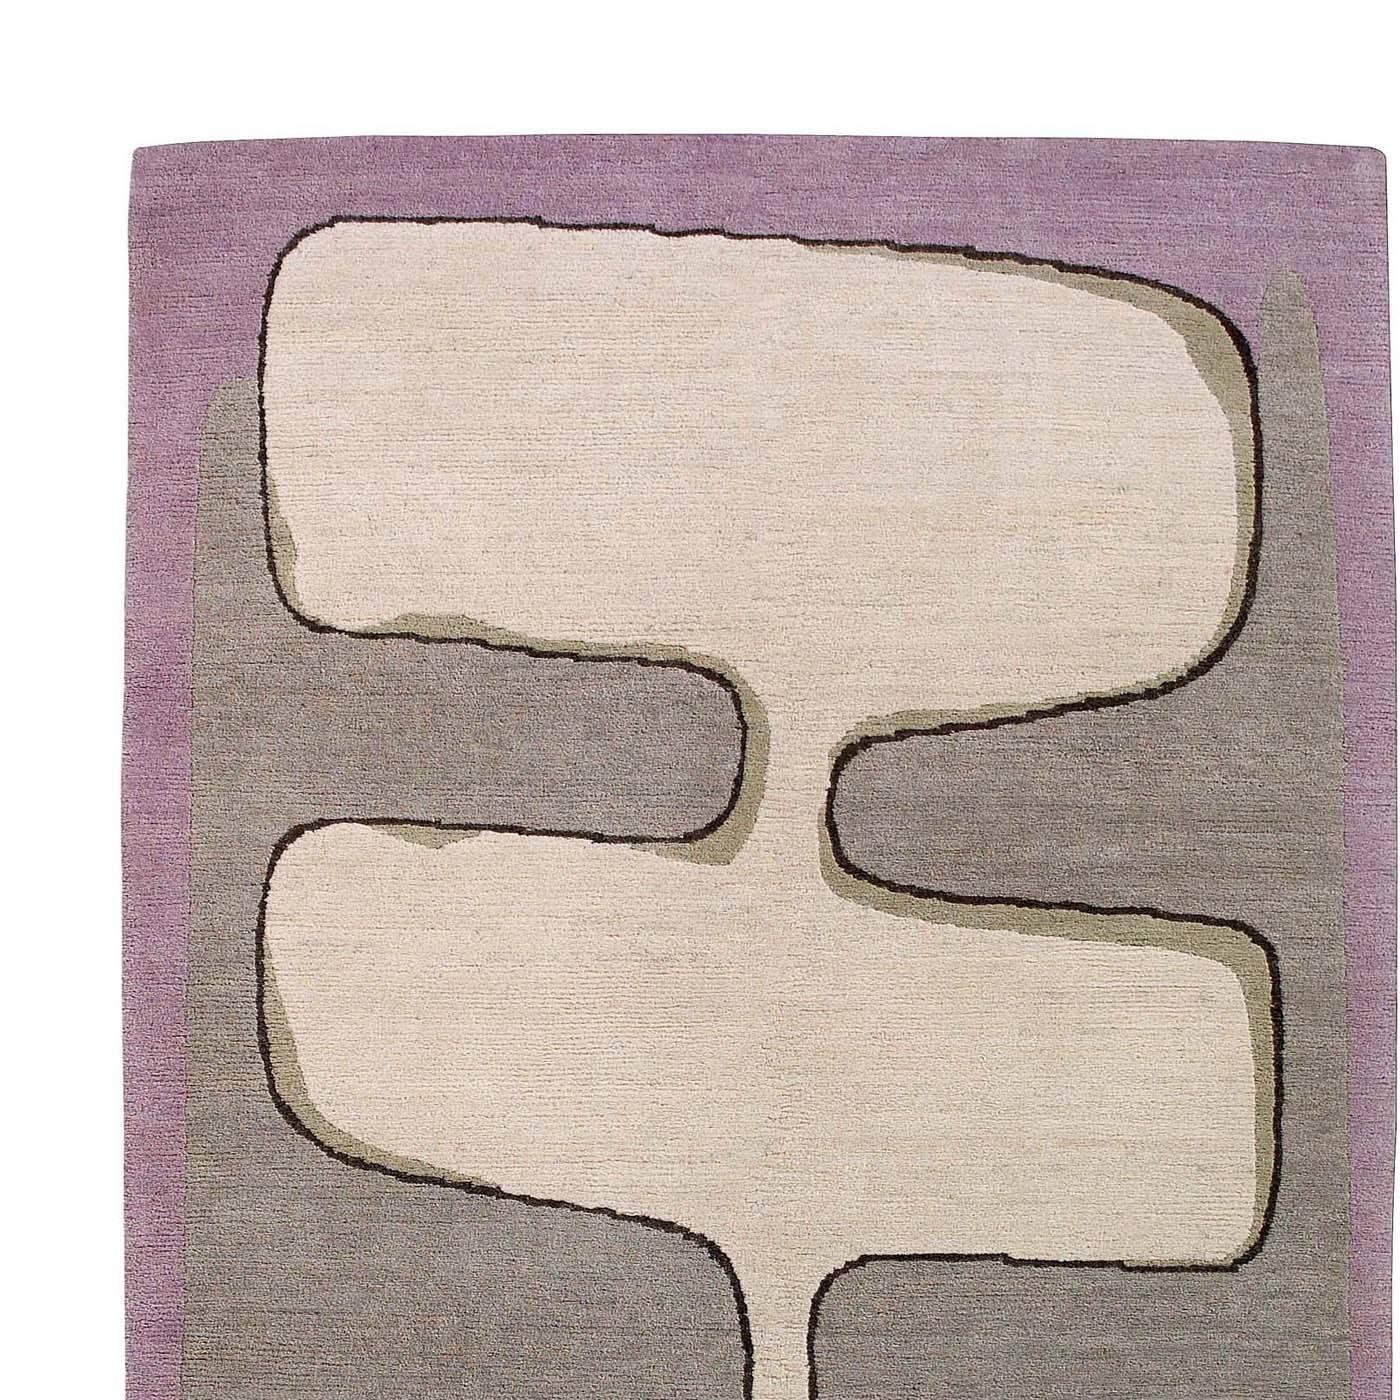 Simple and delicate, this wool carpet was designed by M. Iosa Ghini and was hand-knotted by master artisans in Nepal. The traditional knot used to Craft this rug, which is one of a 36-piece limited series, and the high quality of the Tibetan wool